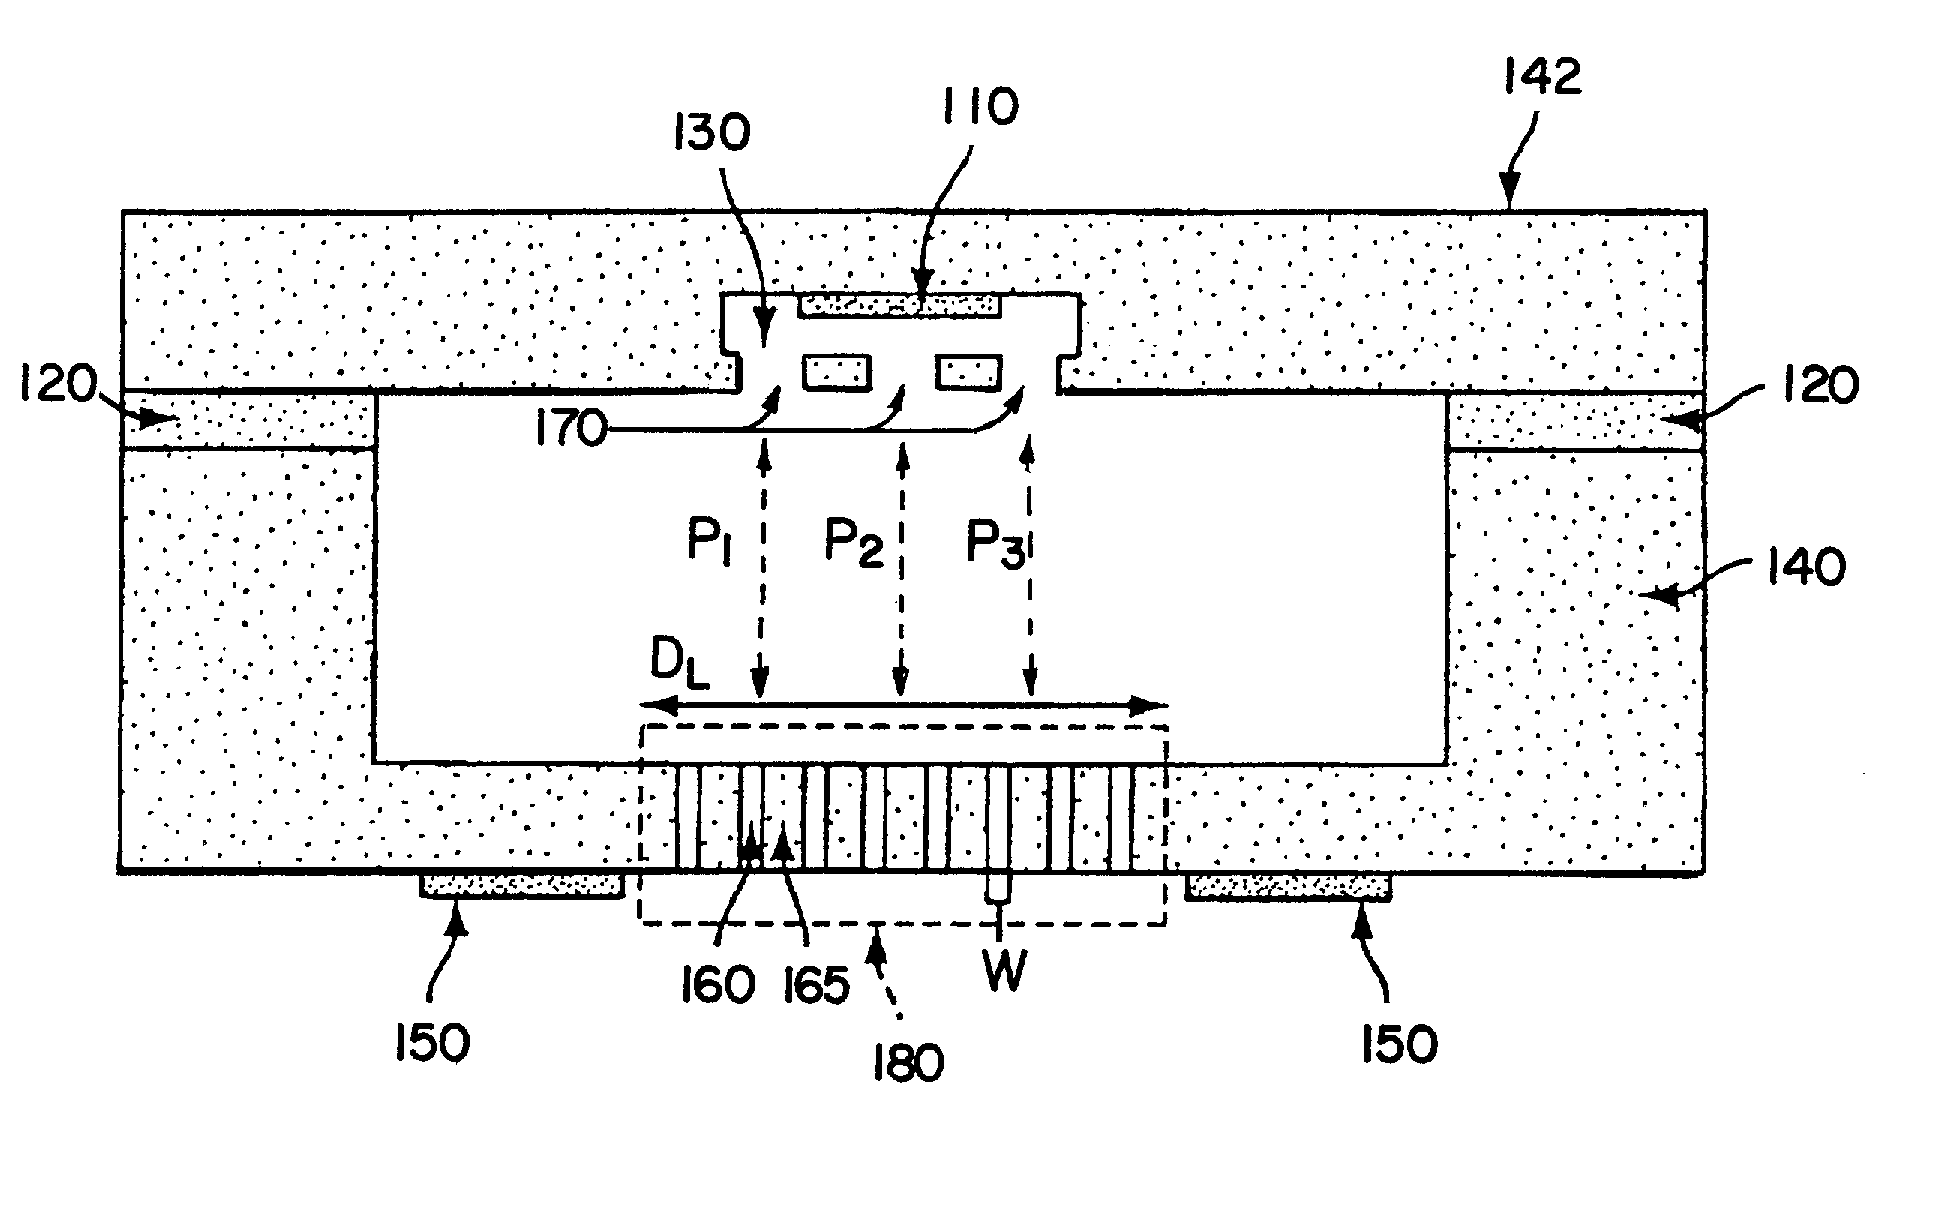 Rapid Ink-Charging Of A Dry Ink Discharge Nozzle